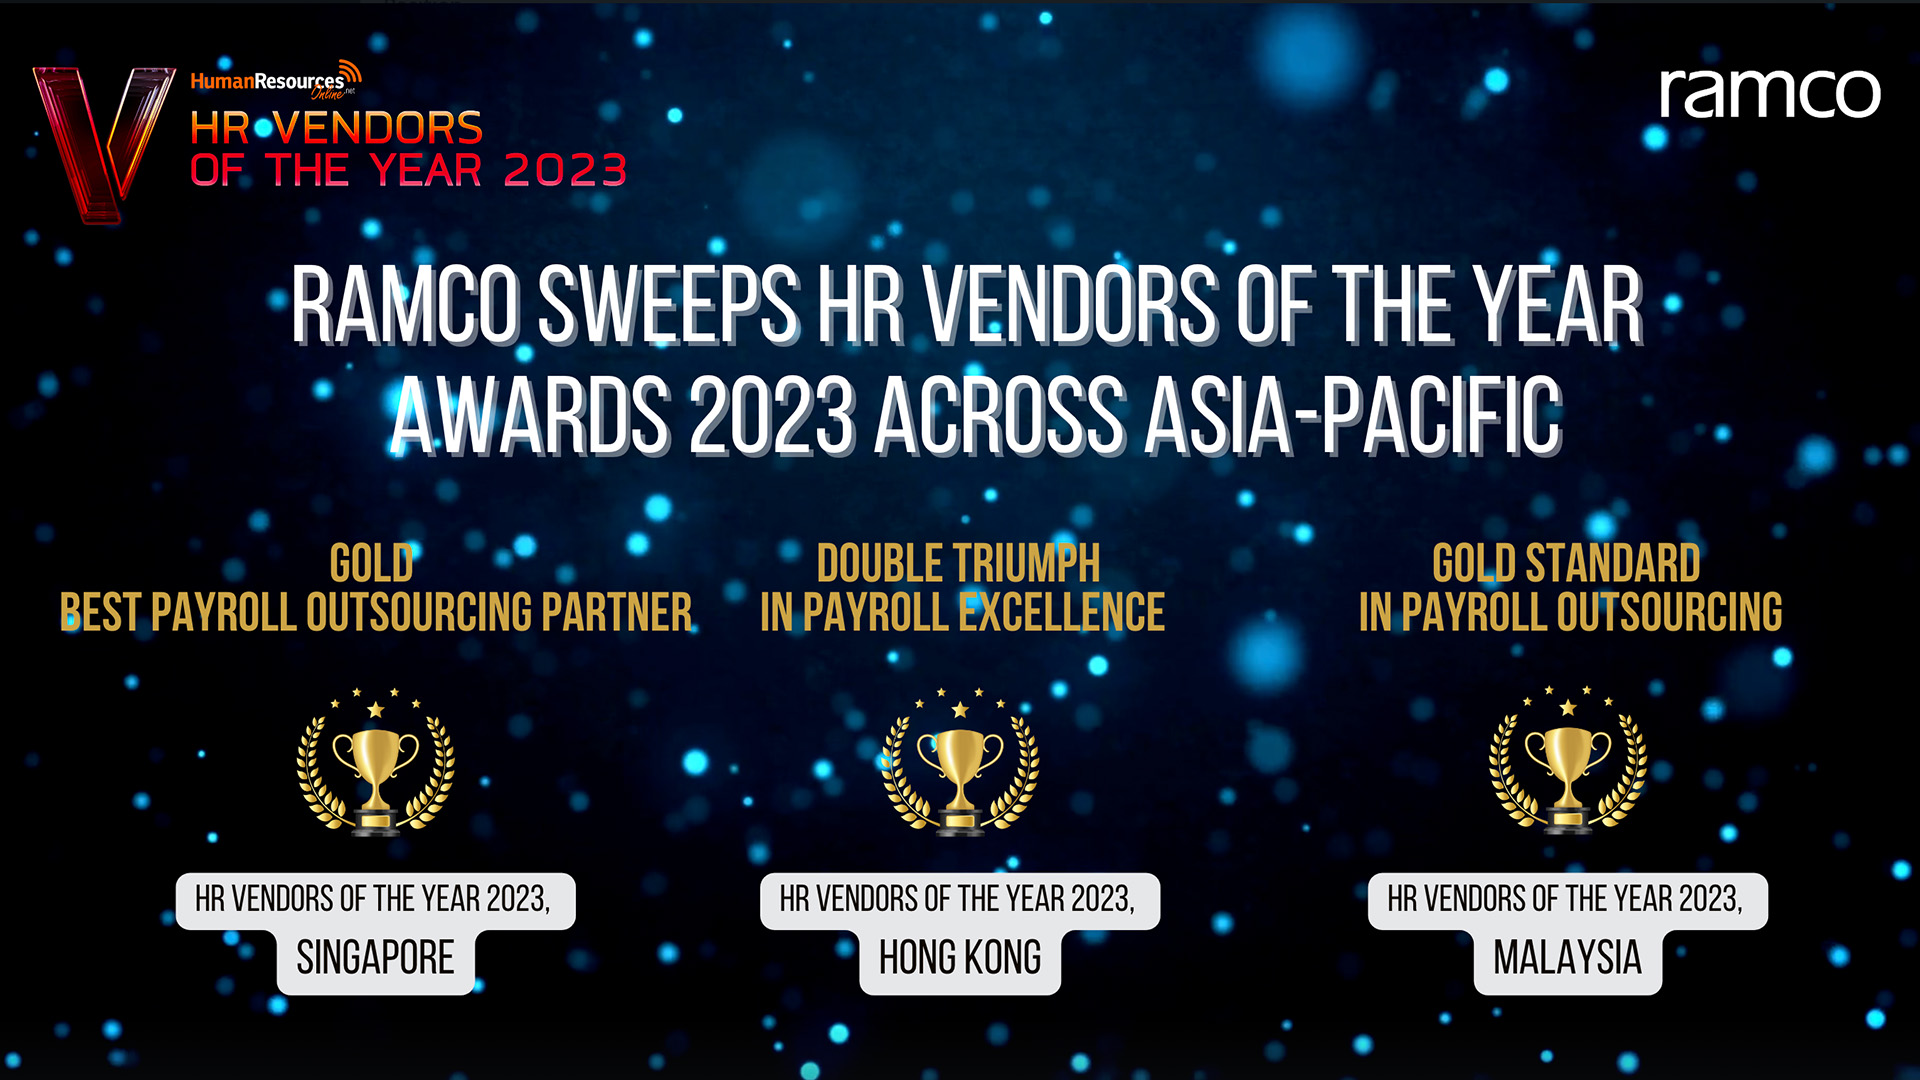 Ramco Sweeps HR Vendors of the Year Awards 2023 Across Asia